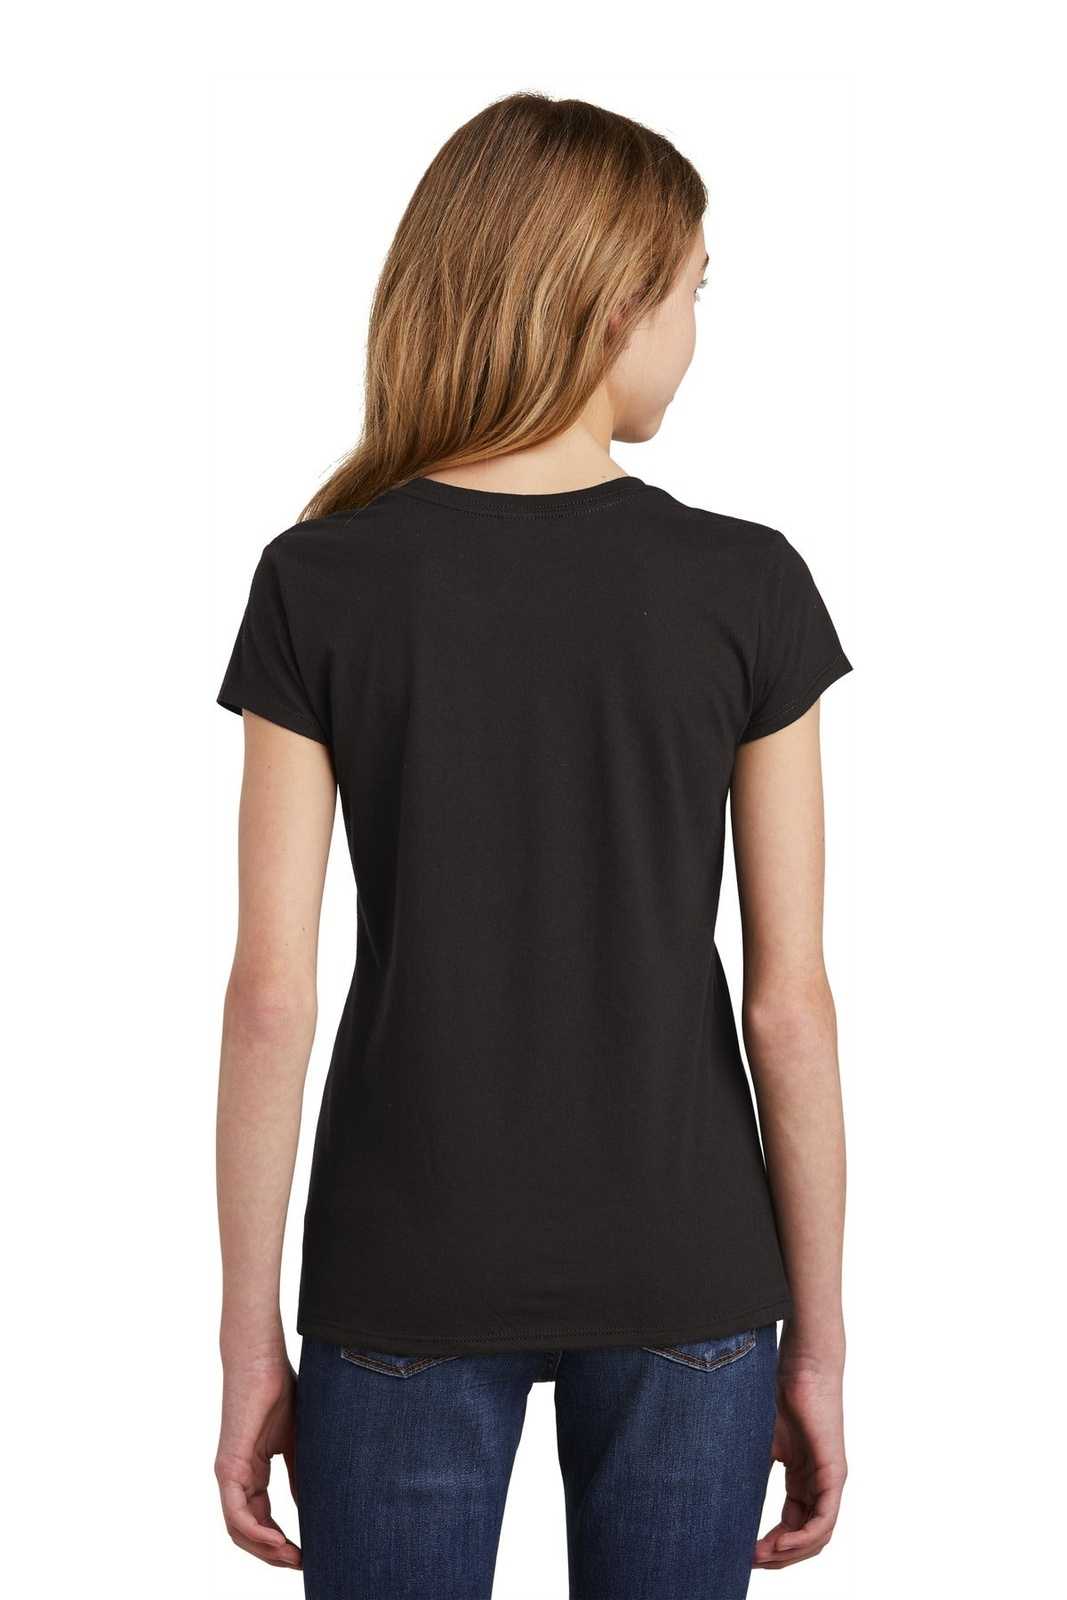 District DT6001YG Girls Very Important Tee - Black - HIT a Double - 2